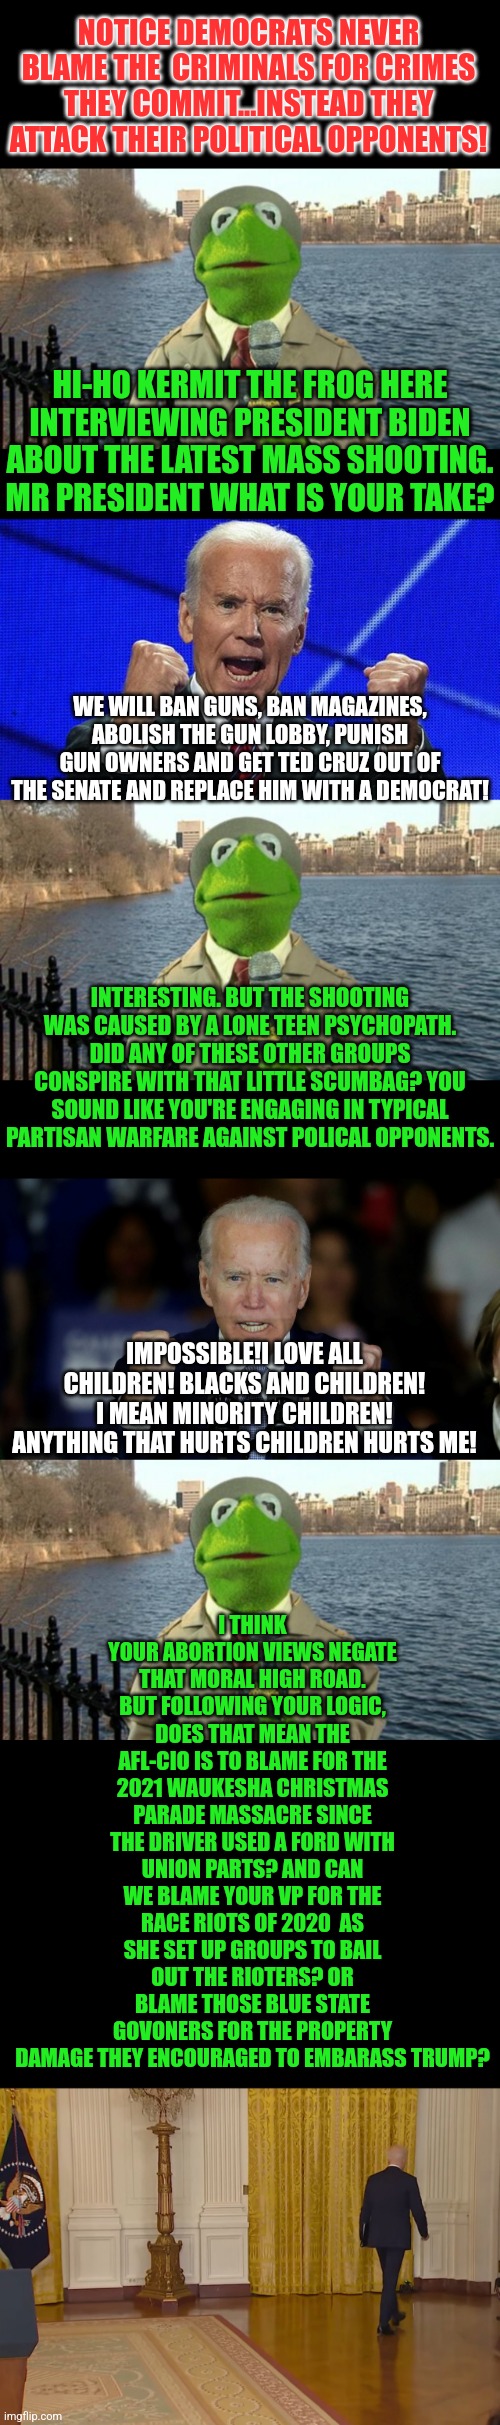 It is sickening to watch democrats attack political rivals instead of offering any healing to a country THEY damaged | NOTICE DEMOCRATS NEVER BLAME THE  CRIMINALS FOR CRIMES THEY COMMIT...INSTEAD THEY ATTACK THEIR POLITICAL OPPONENTS! HI-HO KERMIT THE FROG HERE INTERVIEWING PRESIDENT BIDEN ABOUT THE LATEST MASS SHOOTING. MR PRESIDENT WHAT IS YOUR TAKE? WE WILL BAN GUNS, BAN MAGAZINES, ABOLISH THE GUN LOBBY, PUNISH GUN OWNERS AND GET TED CRUZ OUT OF THE SENATE AND REPLACE HIM WITH A DEMOCRAT! INTERESTING. BUT THE SHOOTING WAS CAUSED BY A LONE TEEN PSYCHOPATH. DID ANY OF THESE OTHER GROUPS CONSPIRE WITH THAT LITTLE SCUMBAG? YOU SOUND LIKE YOU'RE ENGAGING IN TYPICAL PARTISAN WARFARE AGAINST POLICAL OPPONENTS. I THINK YOUR ABORTION VIEWS NEGATE THAT MORAL HIGH ROAD. BUT FOLLOWING YOUR LOGIC, DOES THAT MEAN THE AFL-CIO IS TO BLAME FOR THE 2021 WAUKESHA CHRISTMAS PARADE MASSACRE SINCE THE DRIVER USED A FORD WITH UNION PARTS? AND CAN WE BLAME YOUR VP FOR THE RACE RIOTS OF 2020  AS SHE SET UP GROUPS TO BAIL OUT THE RIOTERS? OR BLAME THOSE BLUE STATE GOVONERS FOR THE PROPERTY DAMAGE THEY ENCOURAGED TO EMBARASS TRUMP? IMPOSSIBLE!I LOVE ALL CHILDREN! BLACKS AND CHILDREN! I MEAN MINORITY CHILDREN! ANYTHING THAT HURTS CHILDREN HURTS ME! | image tagged in kermit news report,angry joe biden,violence is never the answer,liberals,liberal hypocrisy,political | made w/ Imgflip meme maker